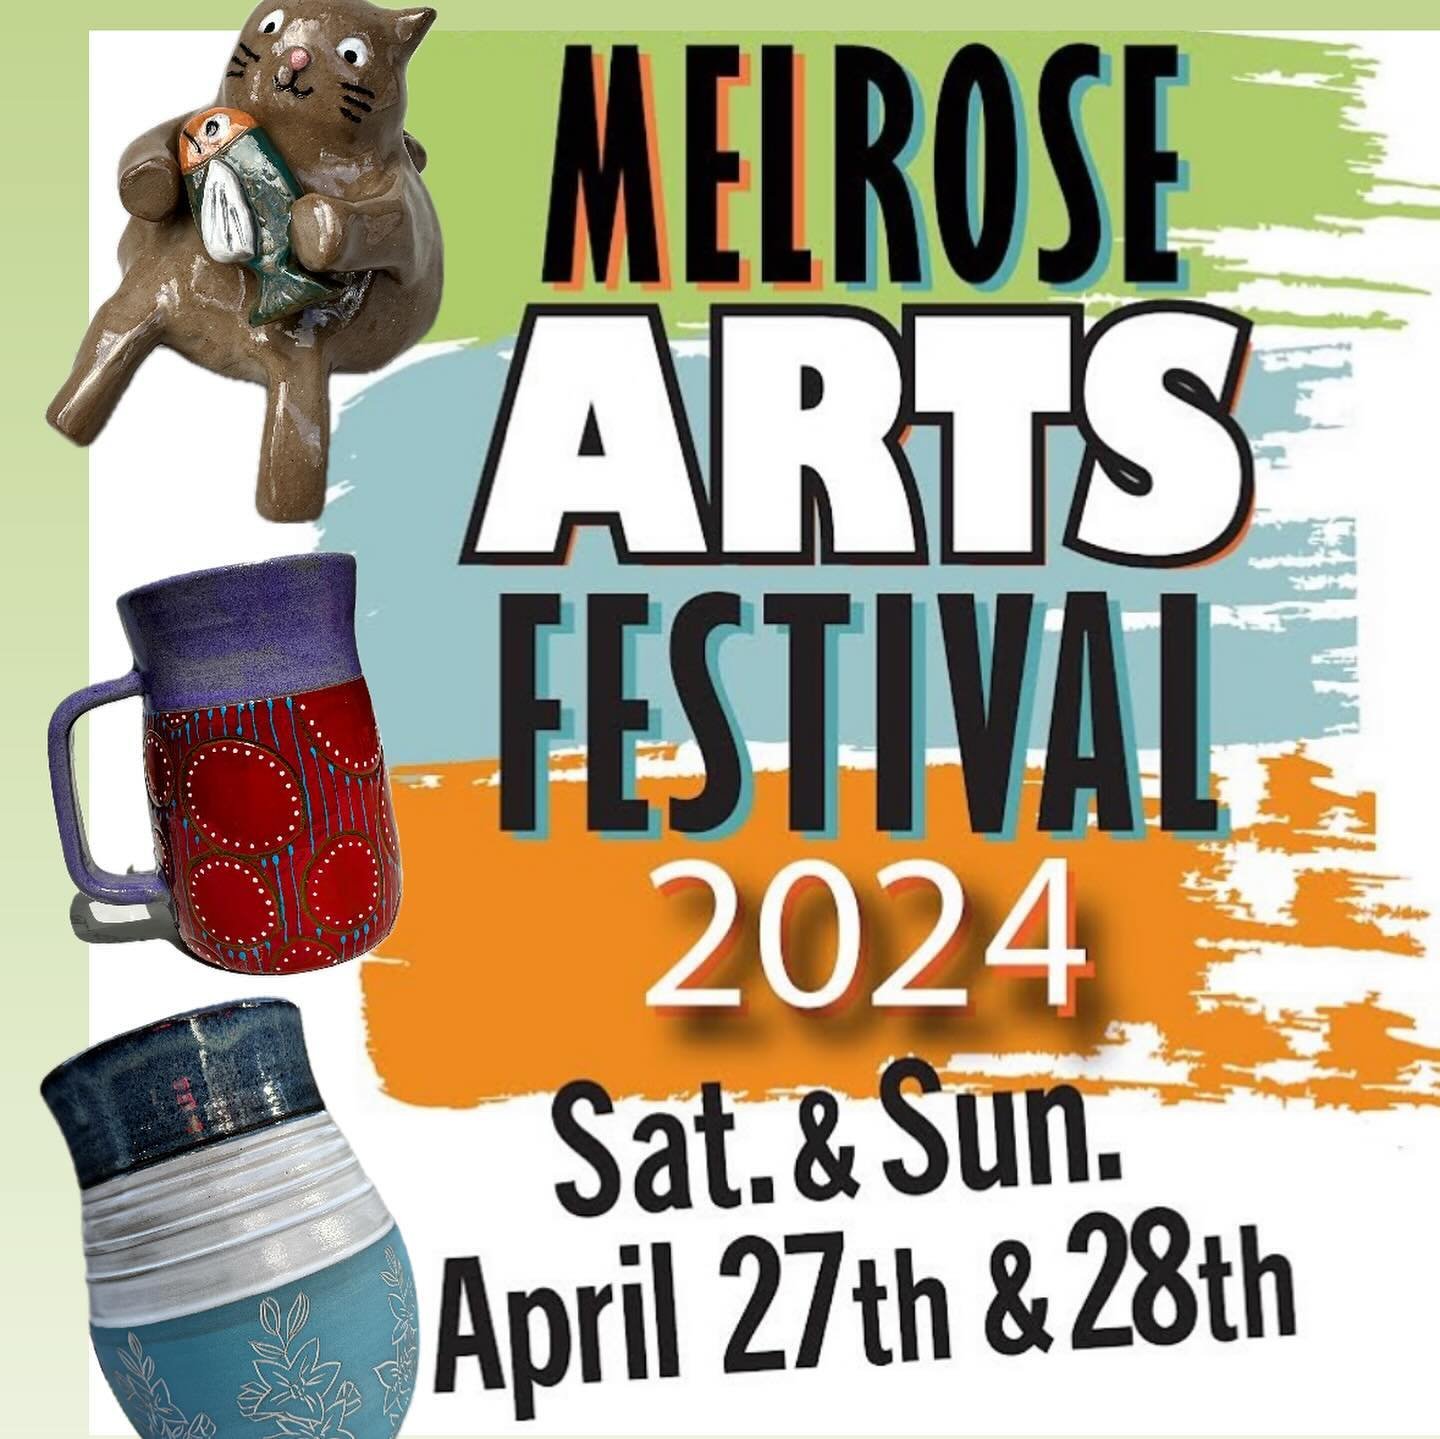 See you THIS WEEKEND at Memorial Hall in Melrose, MA! Sat 11-5 and Sun 11-4. My booth is all set up and oh so colorful!! Find me at booth 13 on the first floor! 

@melroseartsma #melrose #bostonartist #artist #potter #artfestival #localart #shopsmall